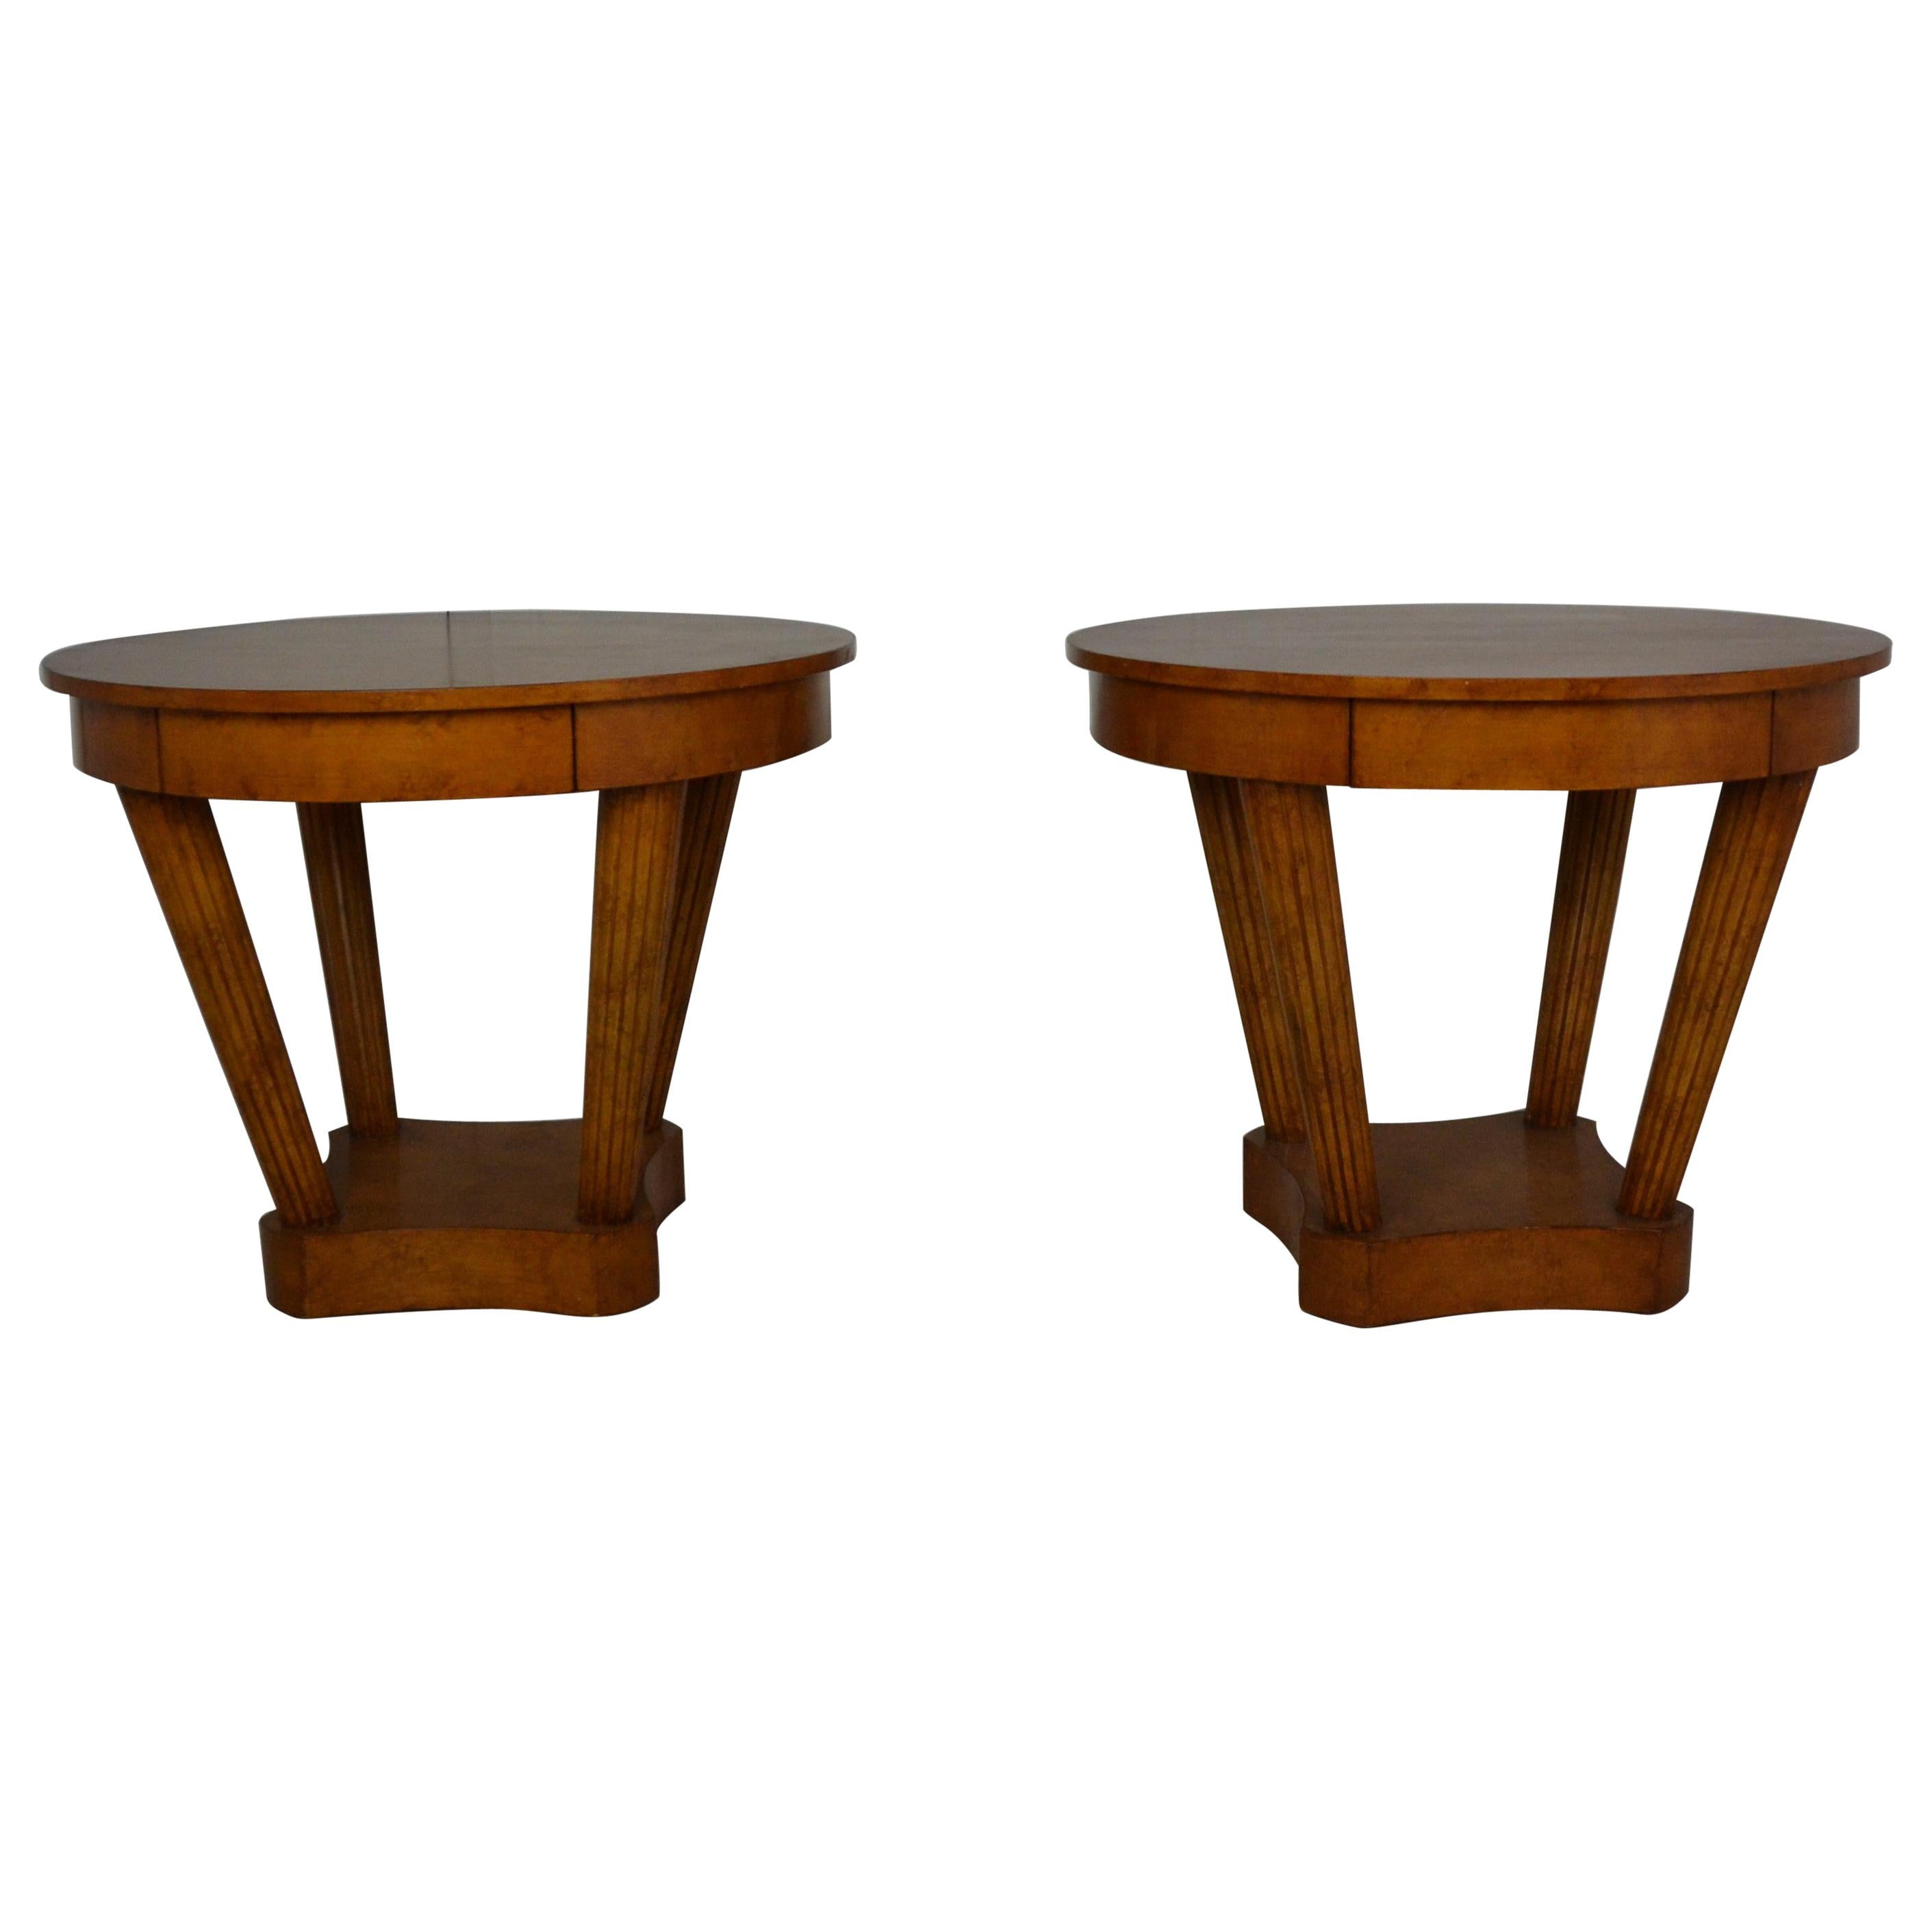 Pair of Over-Sized Round End Tables